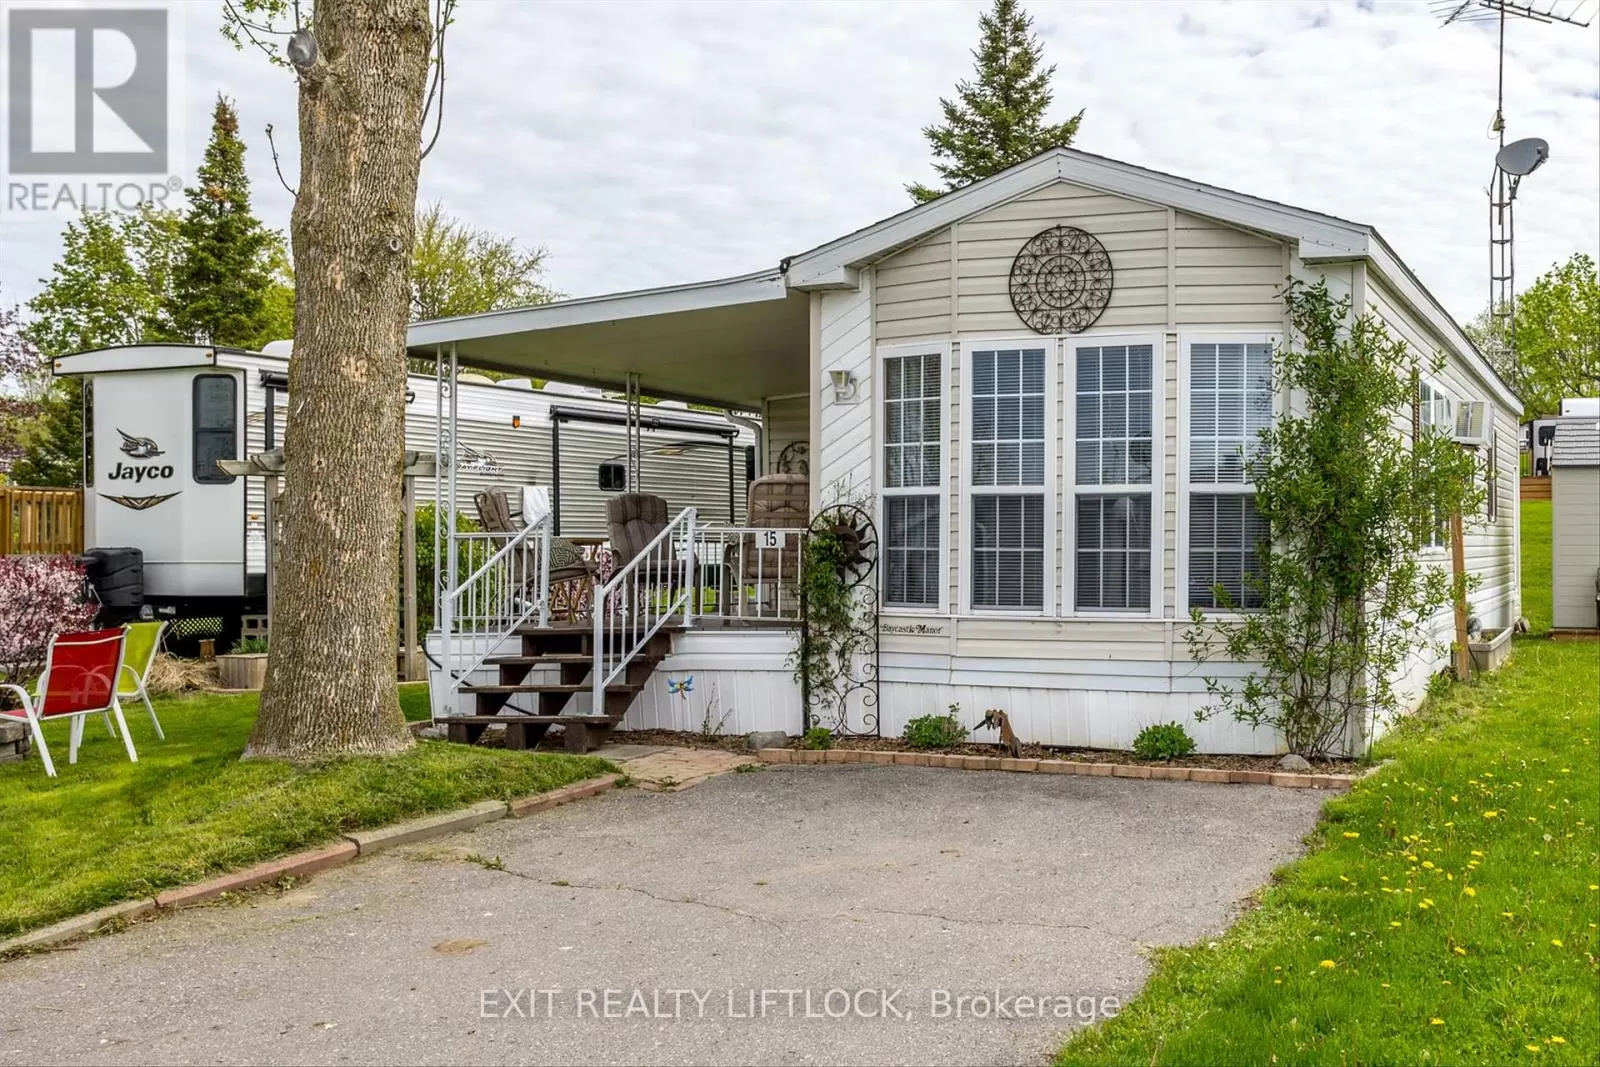 Mobile Home for rent: 15 Heron Drive, Otonabee-South Monaghan, Ontario K0L 2G0